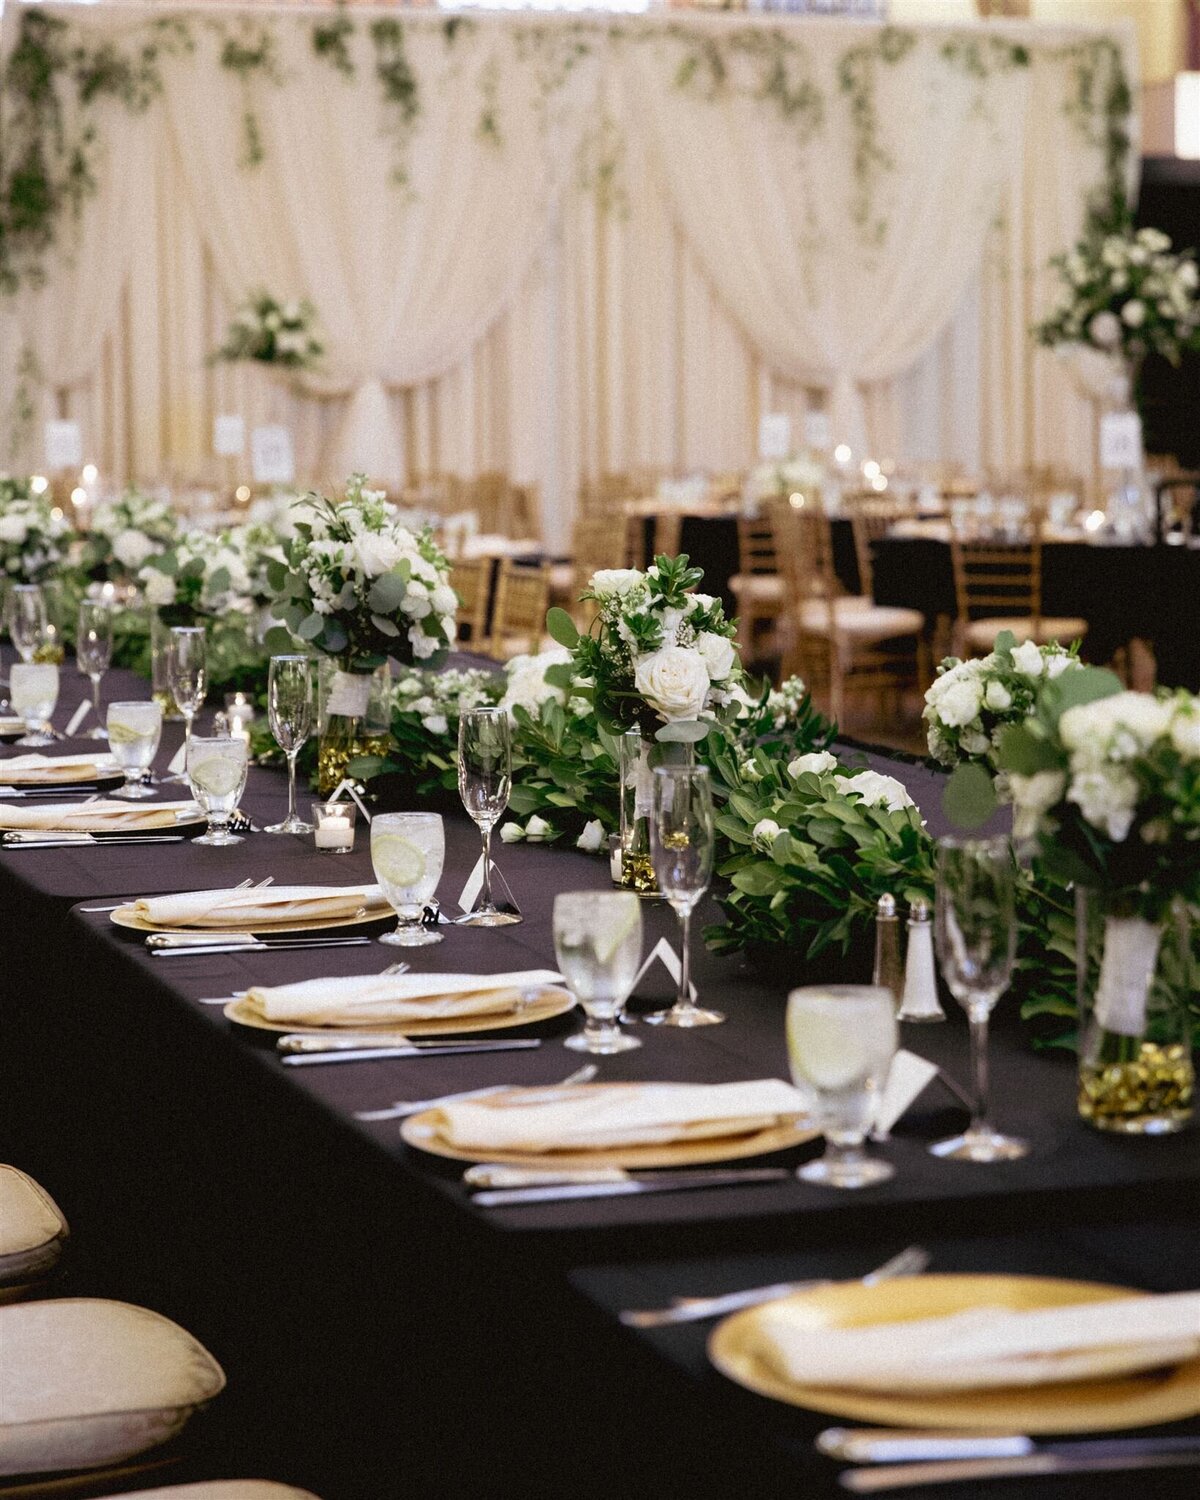 Classic florals on headtable